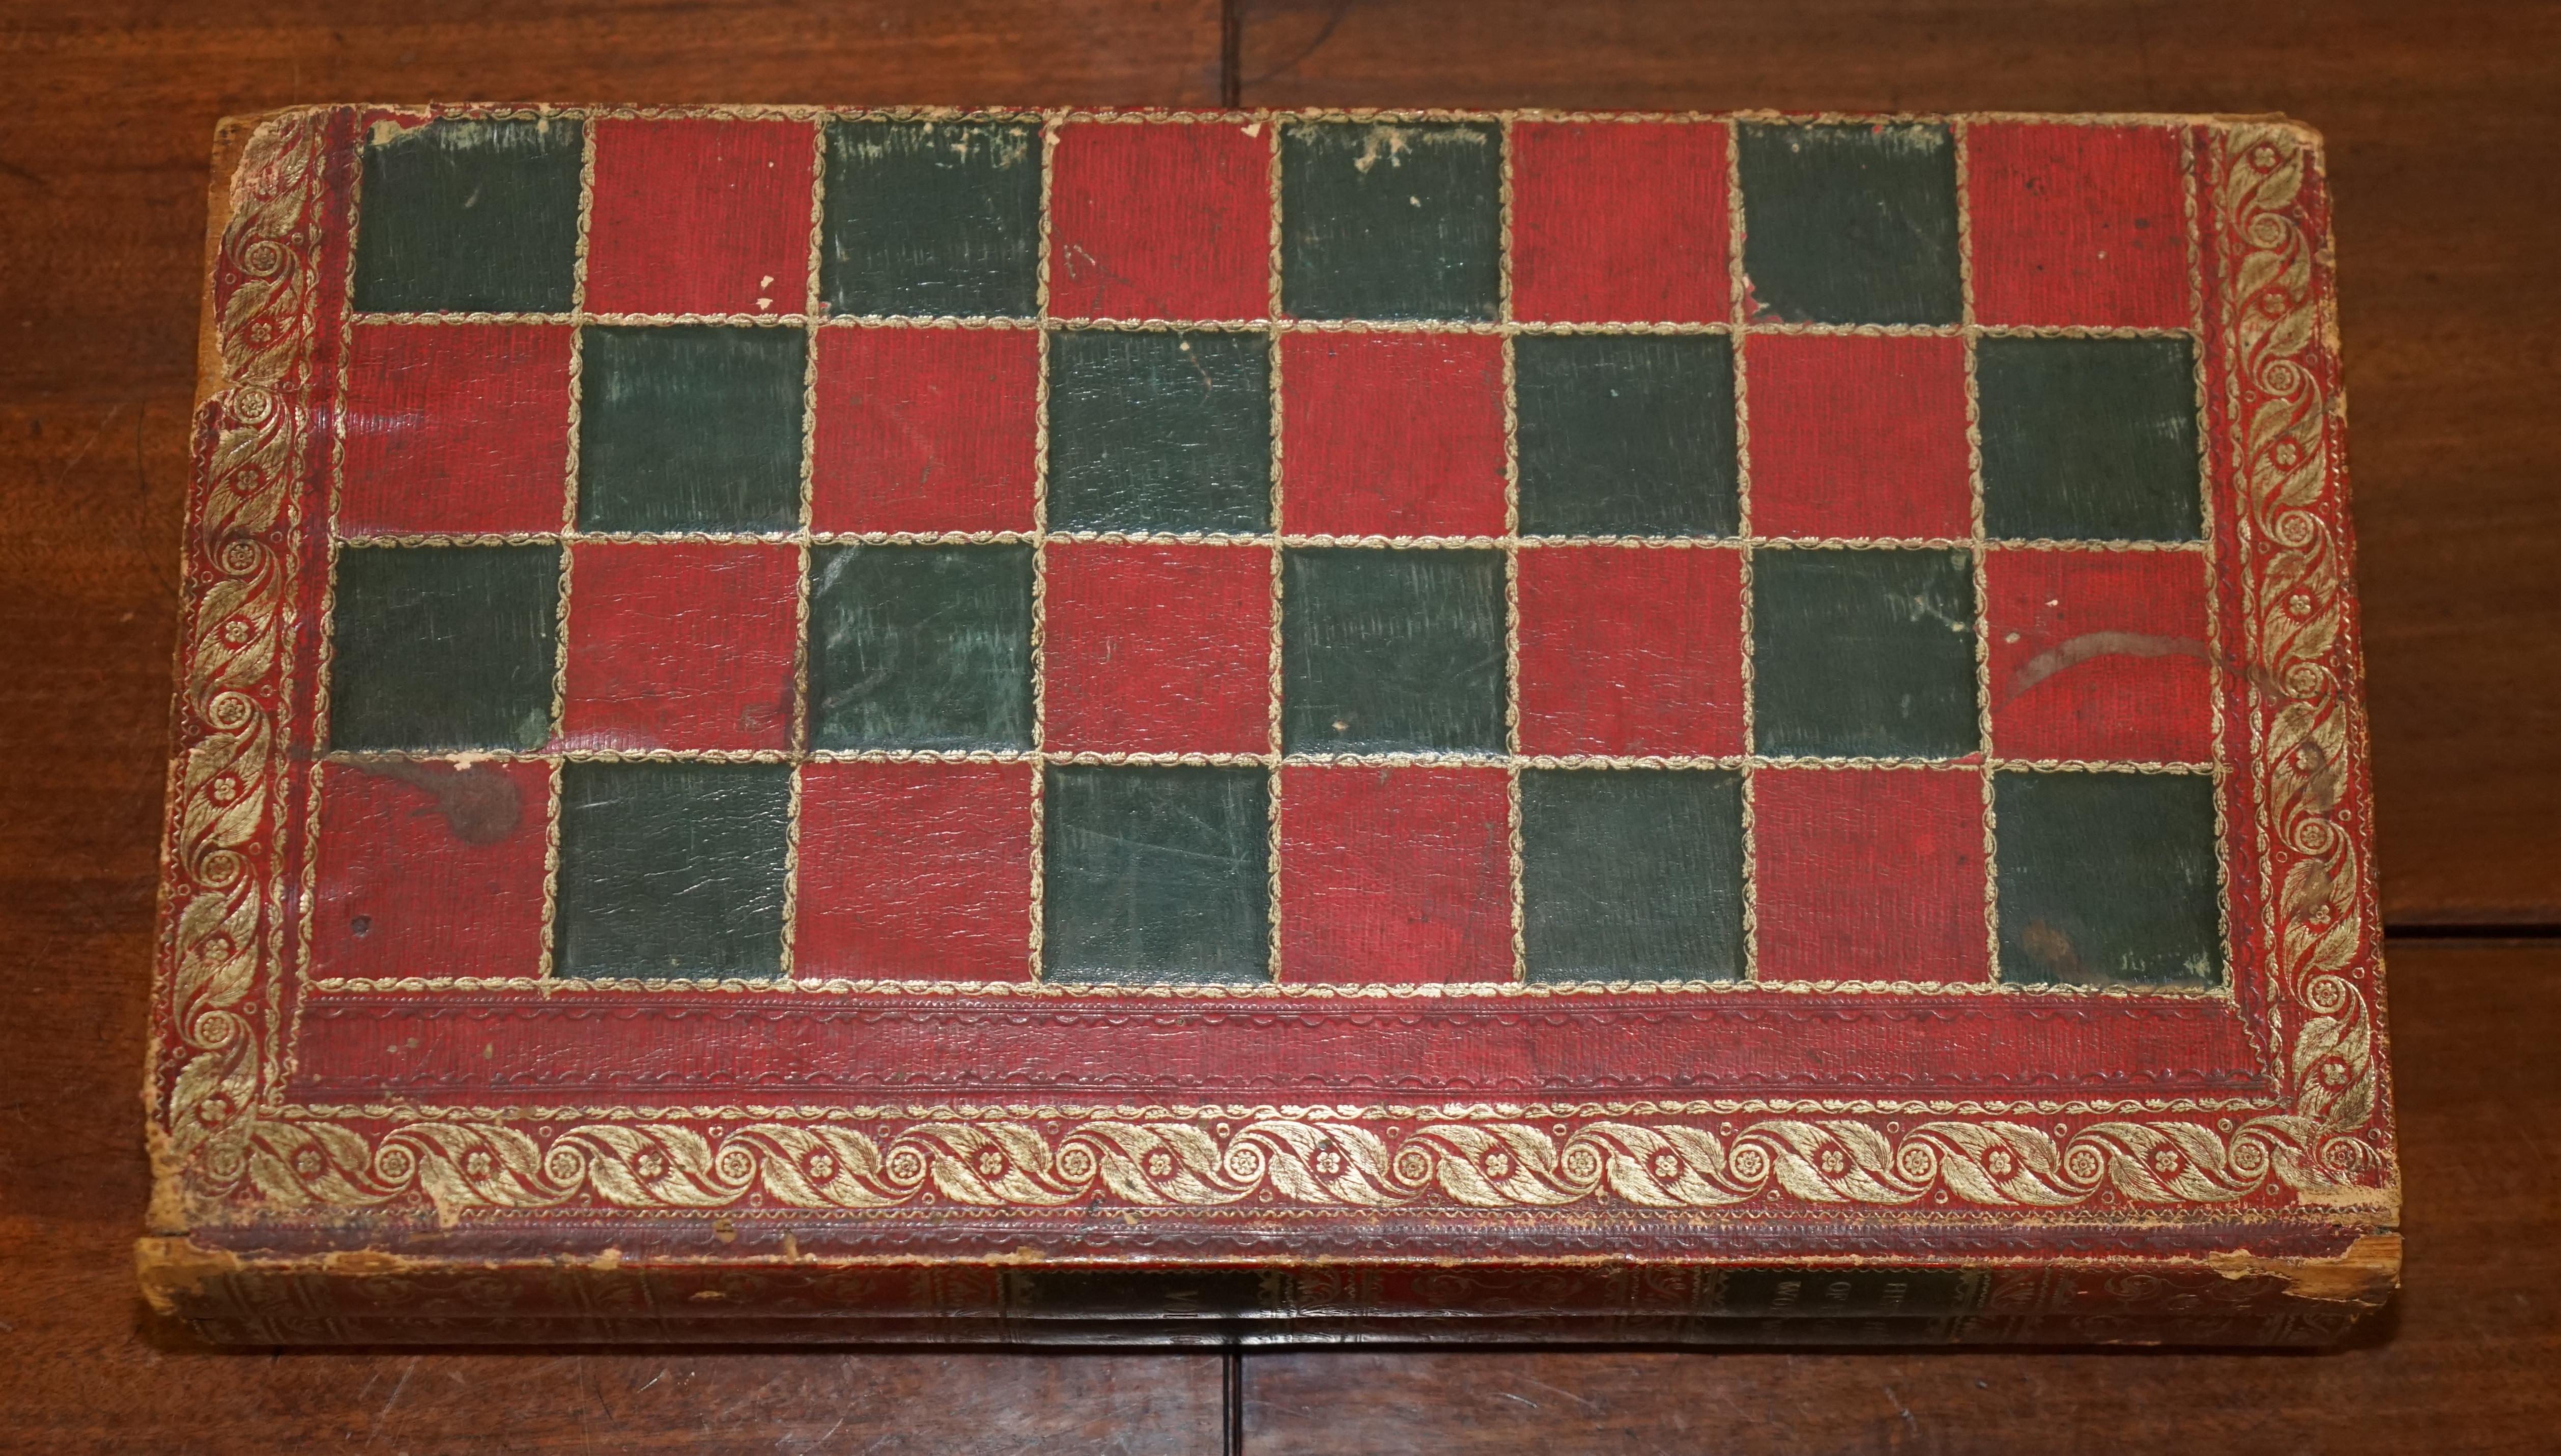 Hand-Crafted Jaques London Victorian Faux Book Chessboard Staunton Pieces & Hardwood Clock For Sale